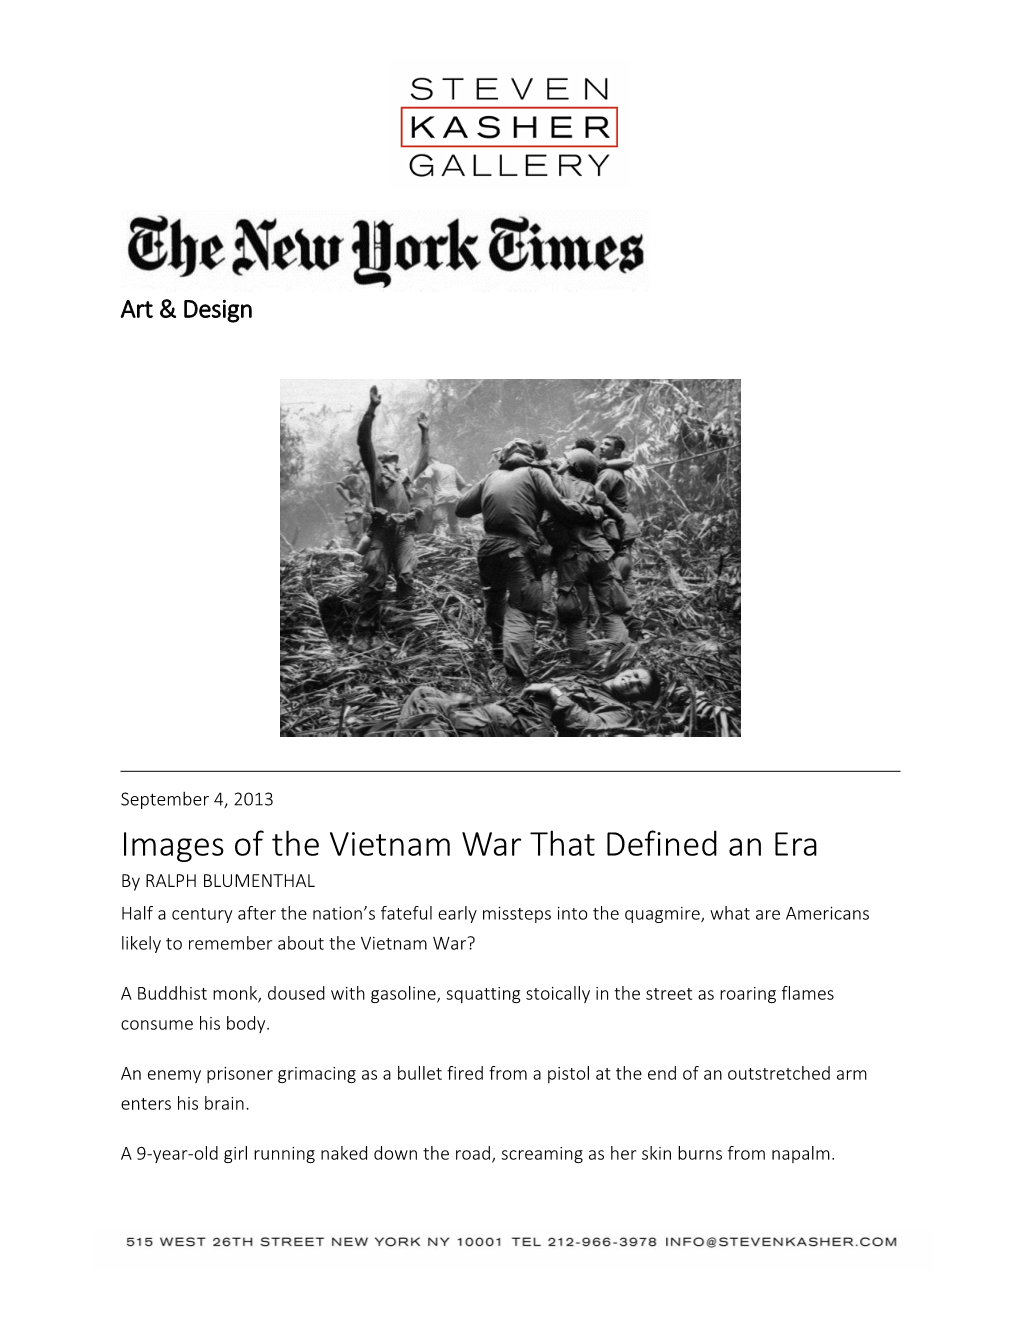 Images of the Vietnam War That Defined An